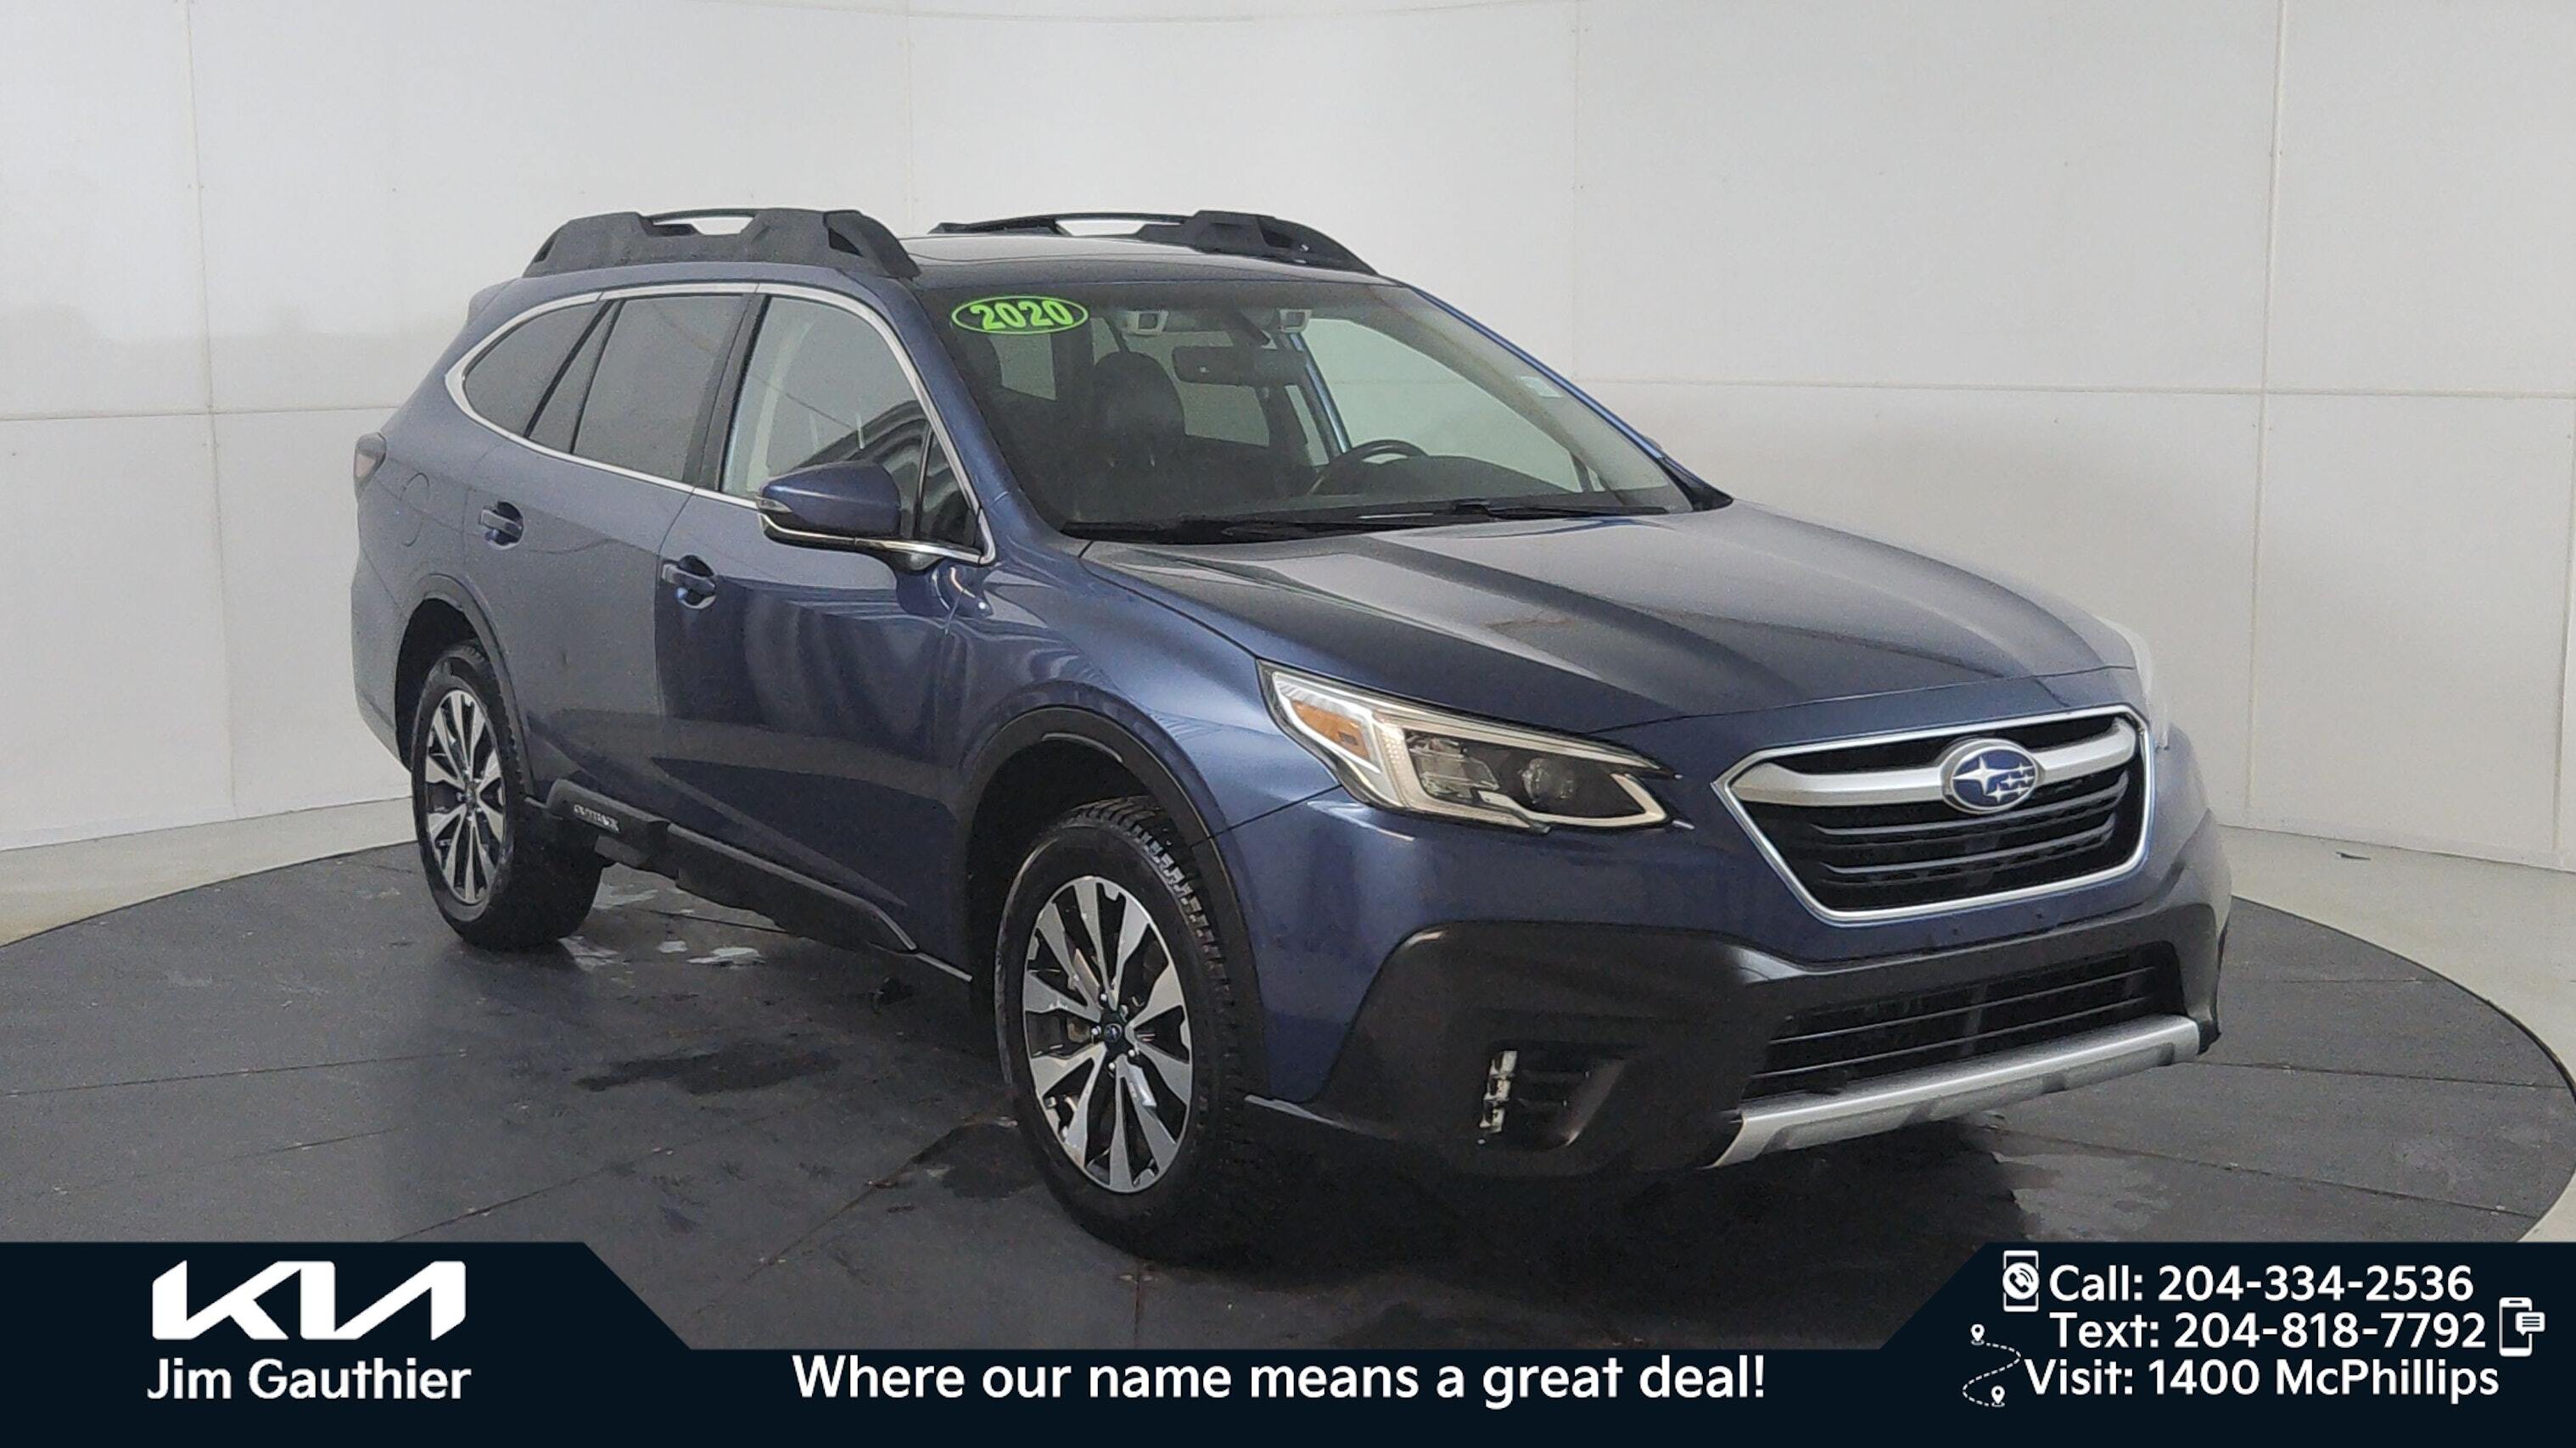 2020 Subaru Outback 2.4i Limited XT, Local Trade, Lots of features